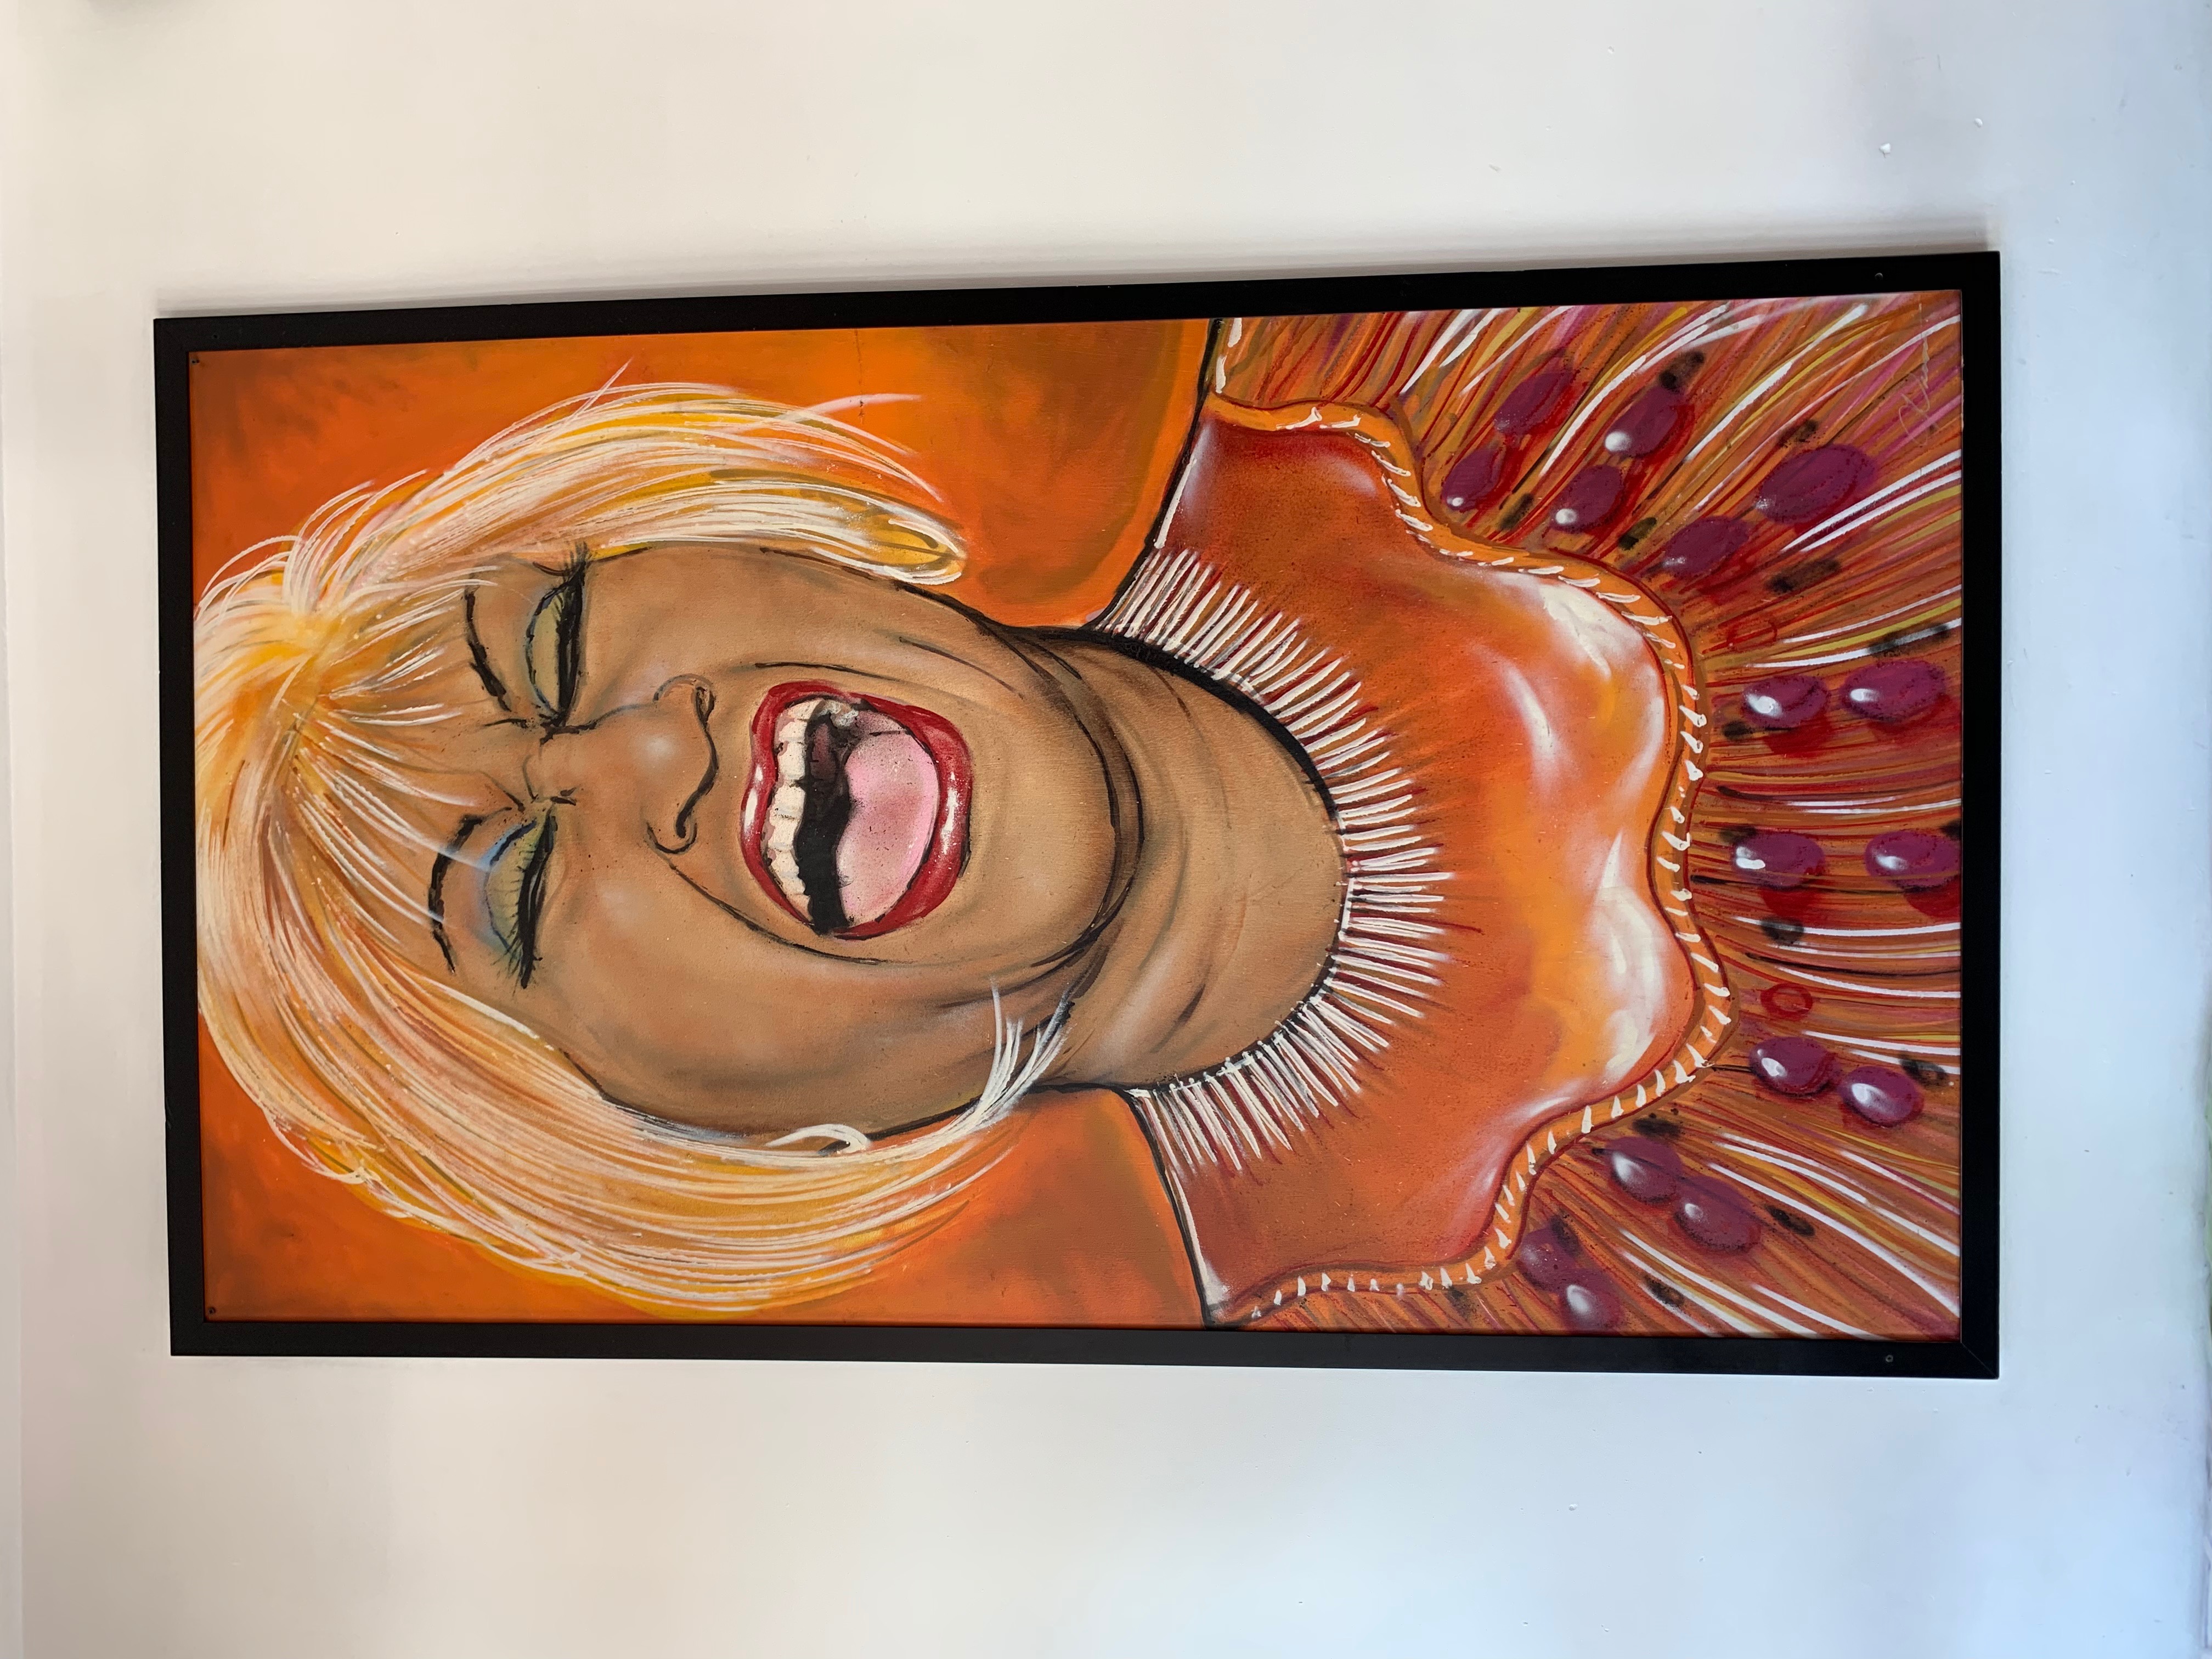 A portrait of Celia Cruz wearing a blond wing and singing passionately